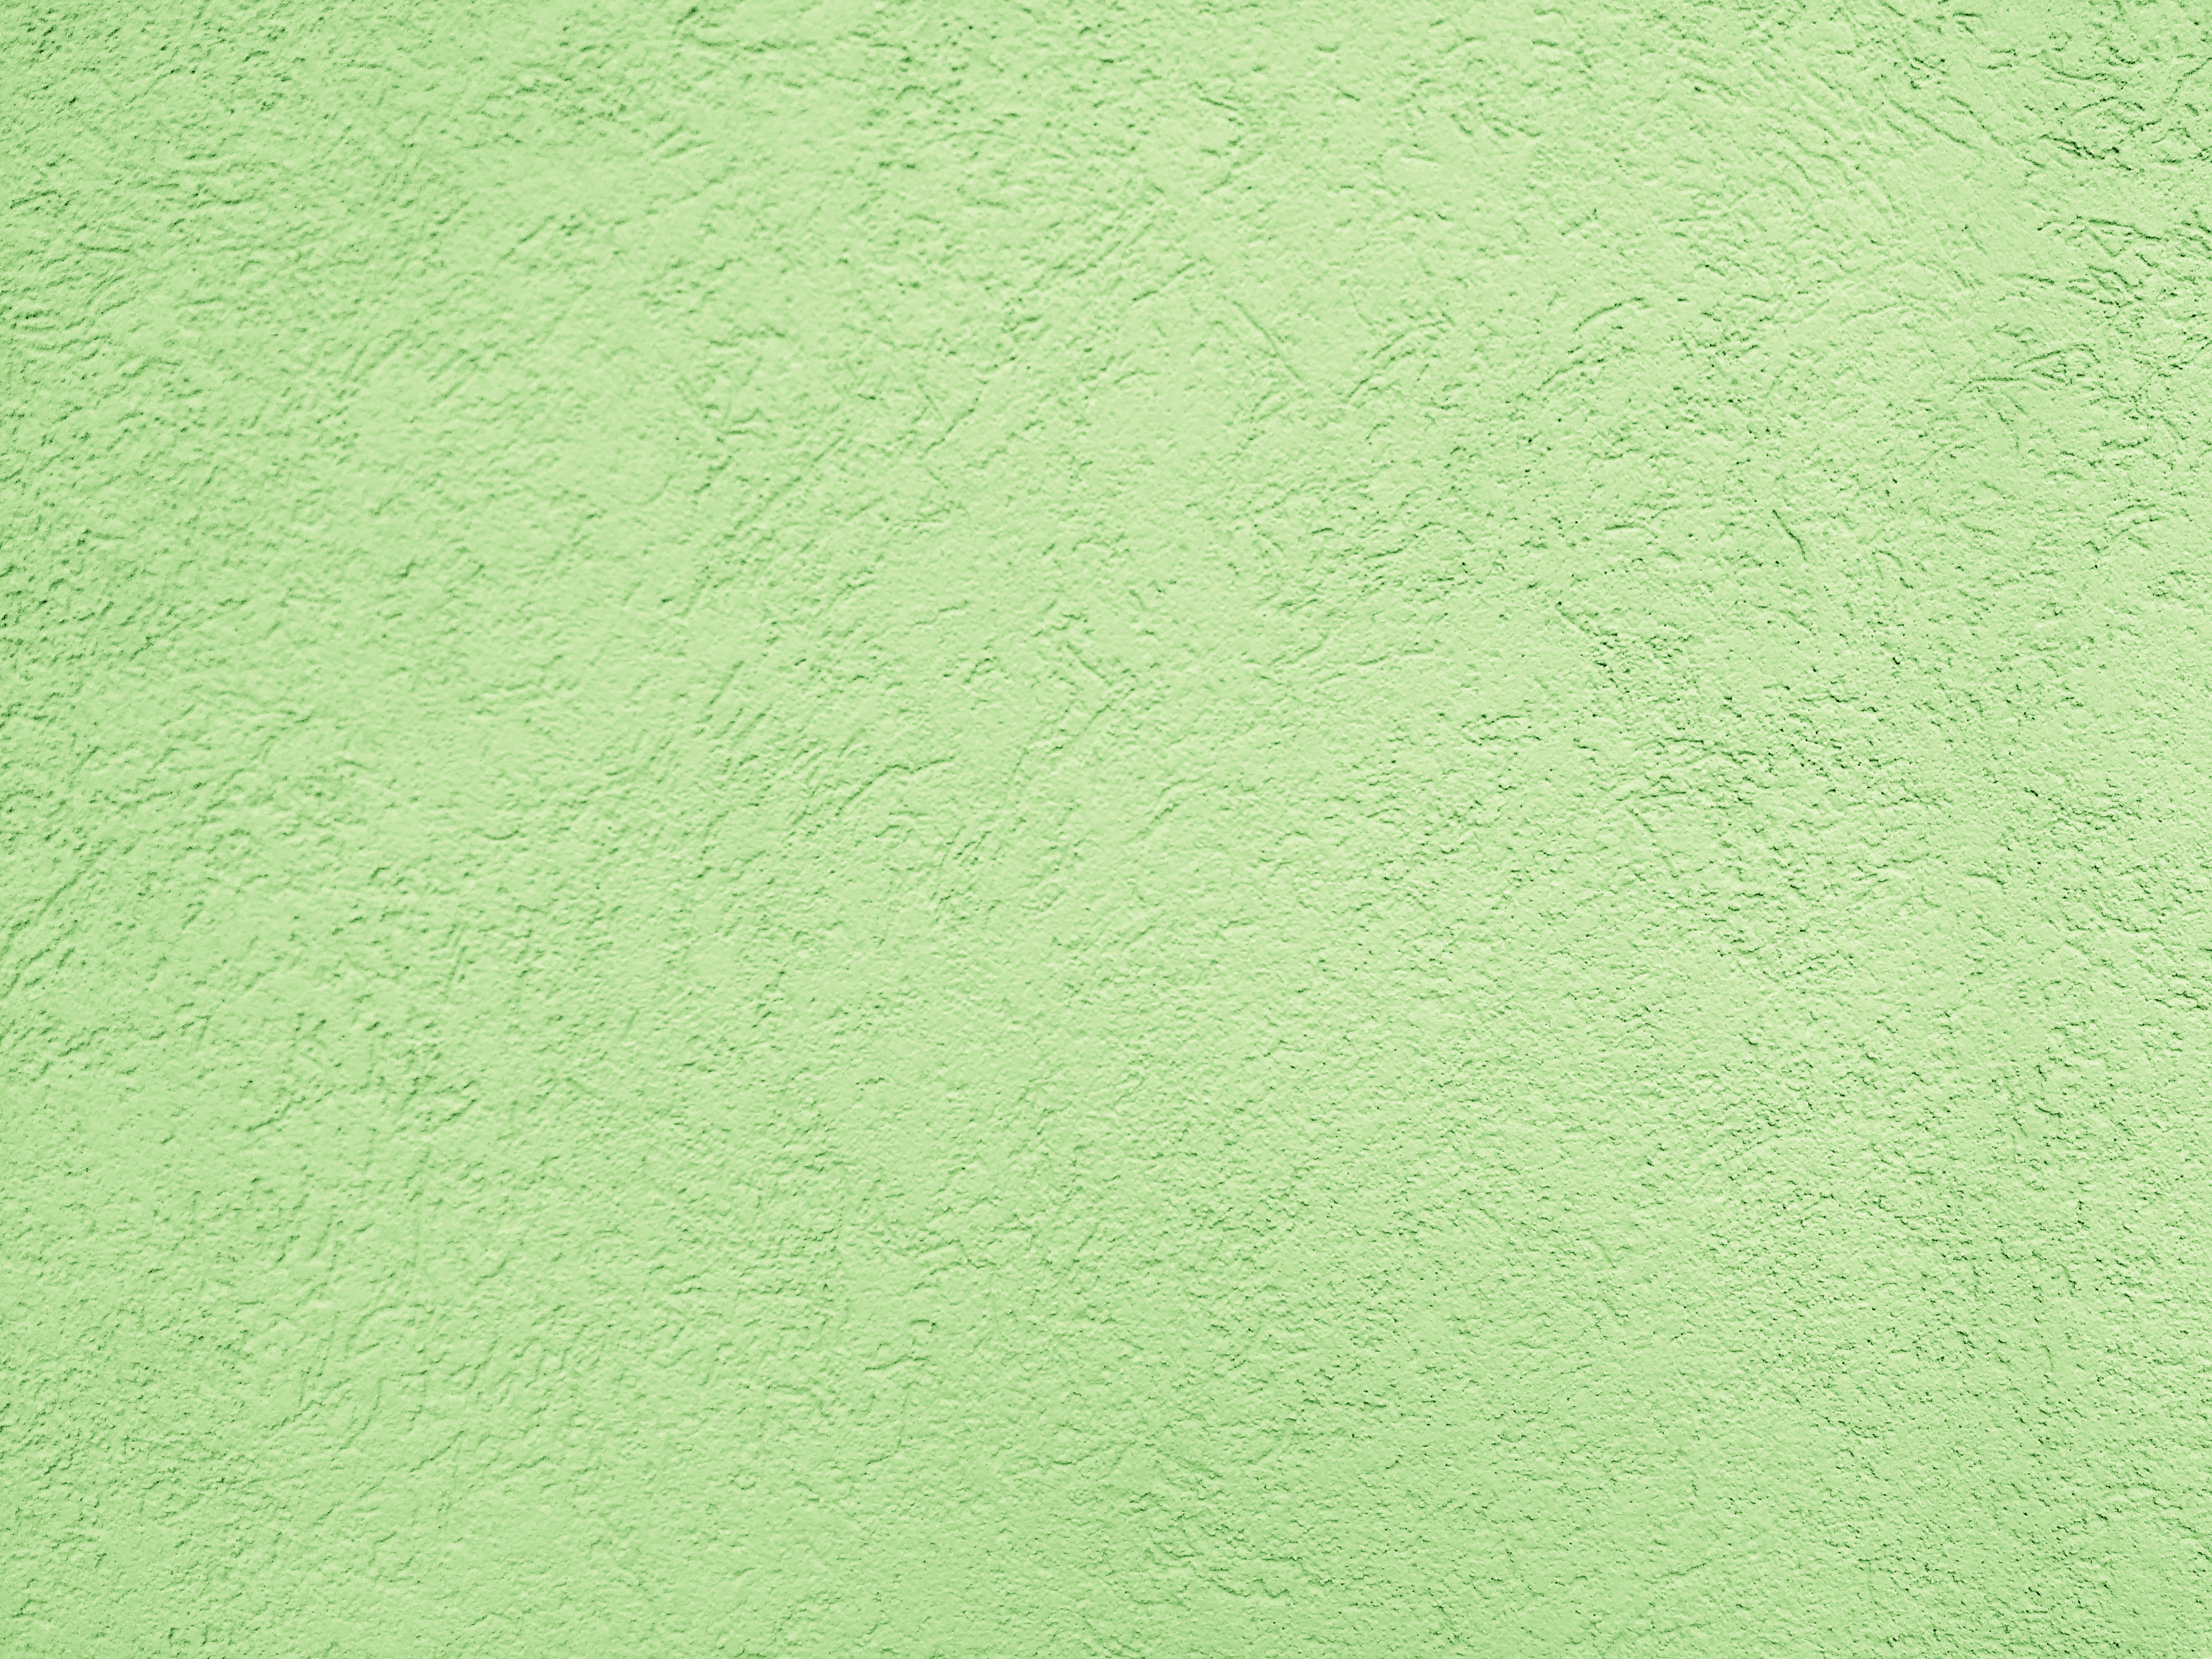  Mint Green  Textured Wall Close Up Picture Free 